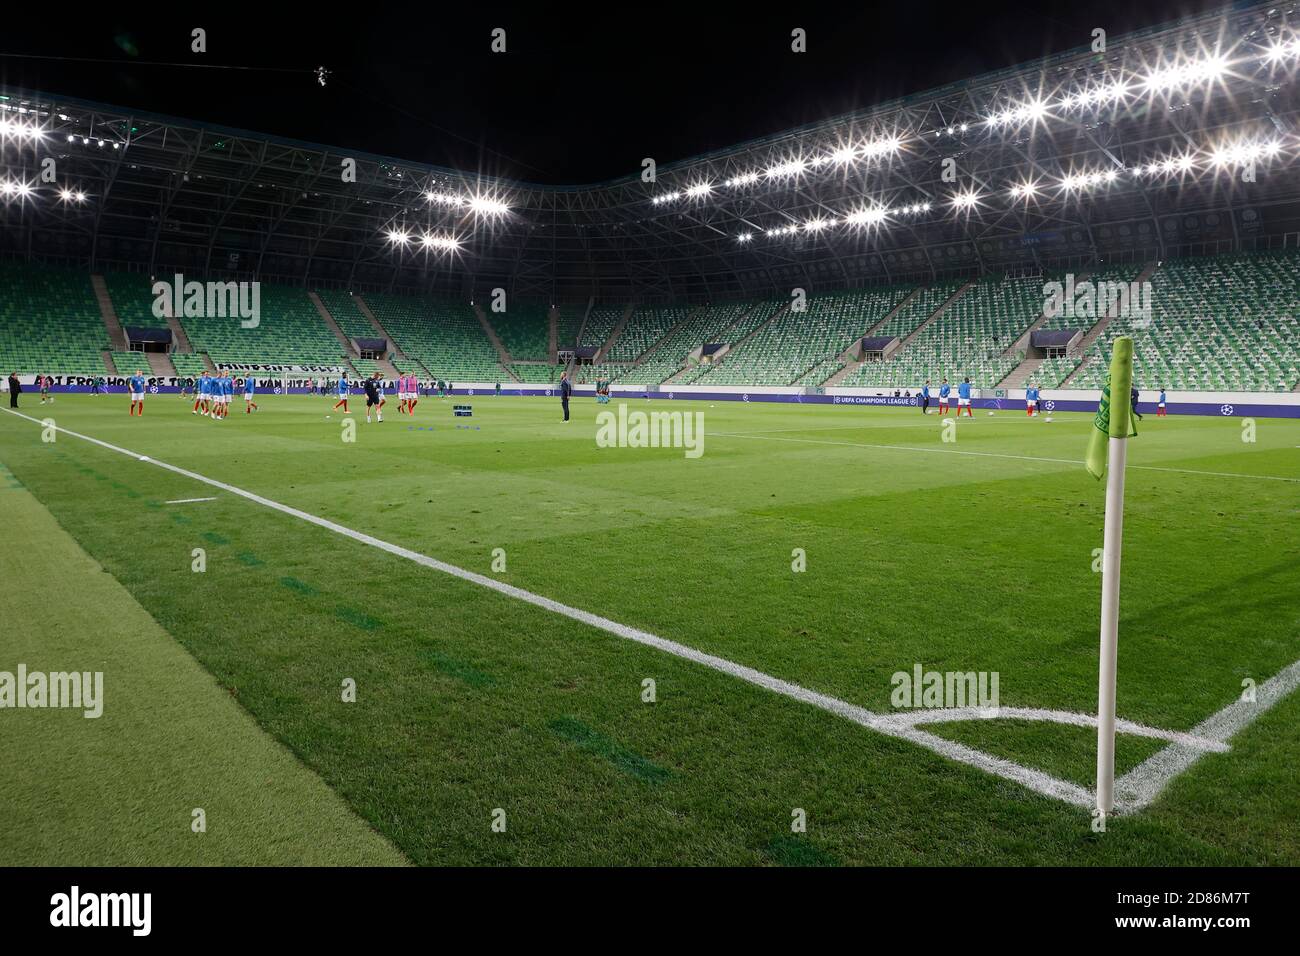 Ferencvaros Stadion High Resolution Stock Photography And Images Alamy